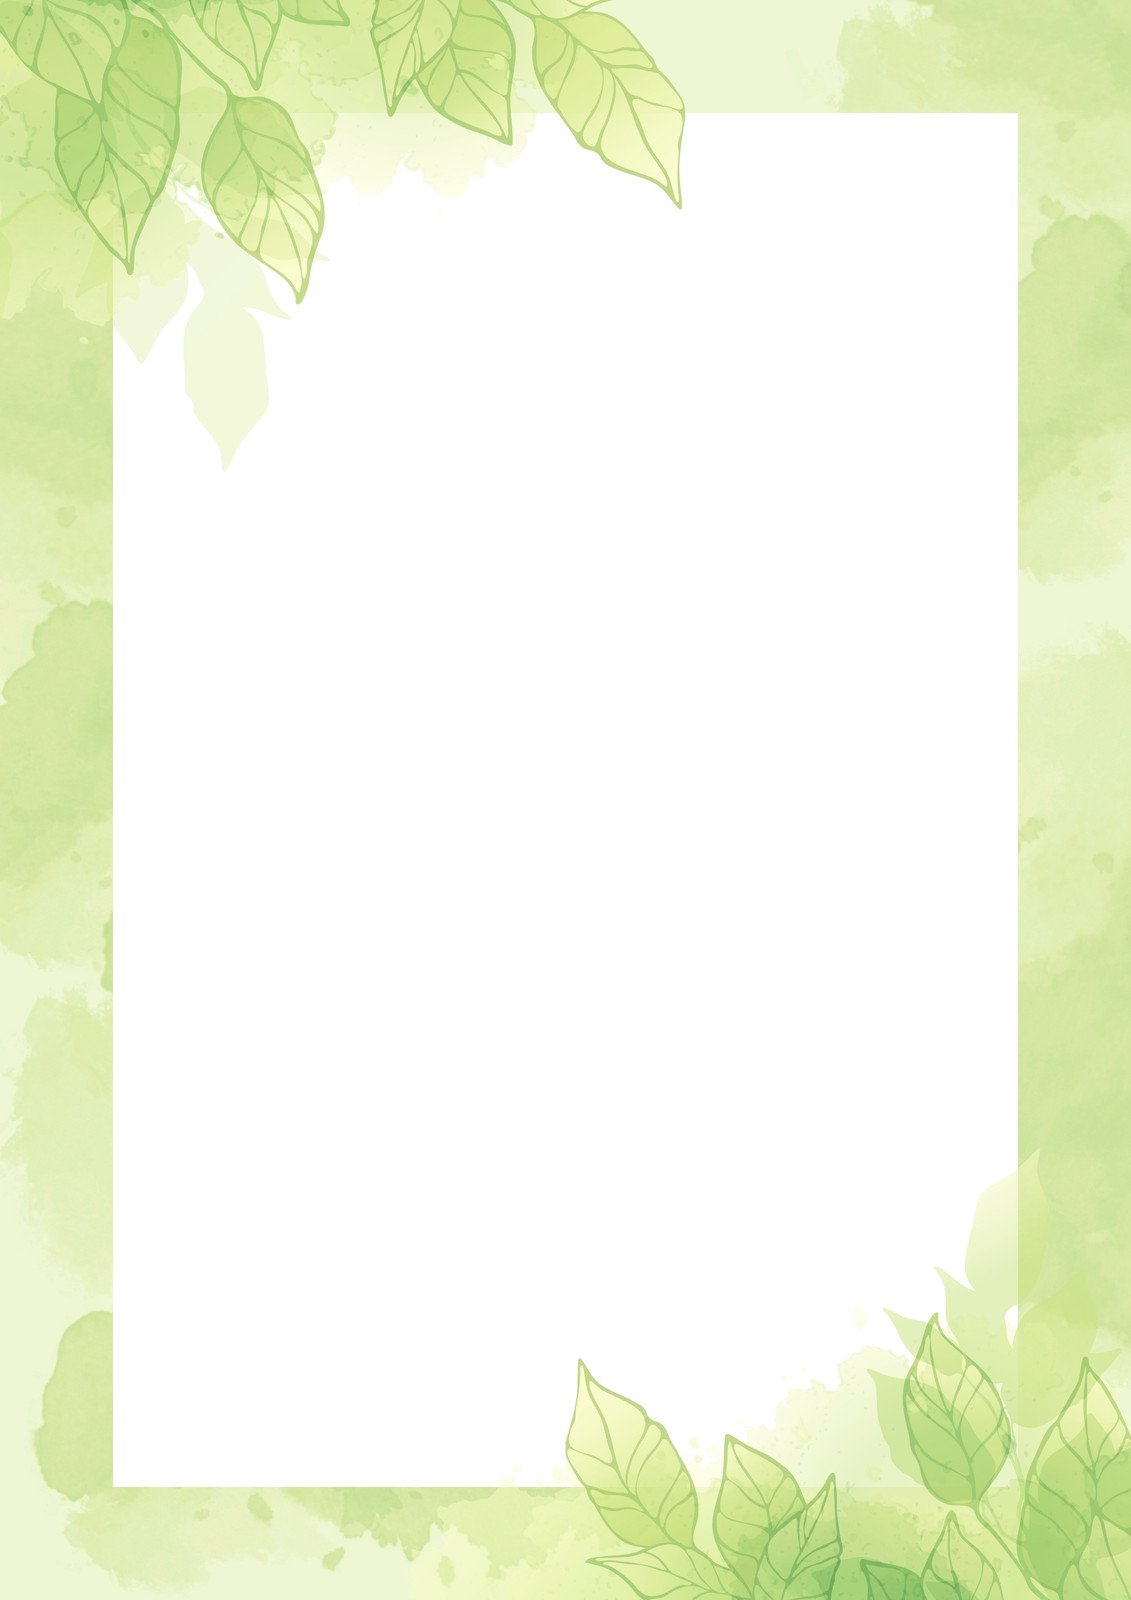 Page 21 - Free printable page border templates you can customize ...